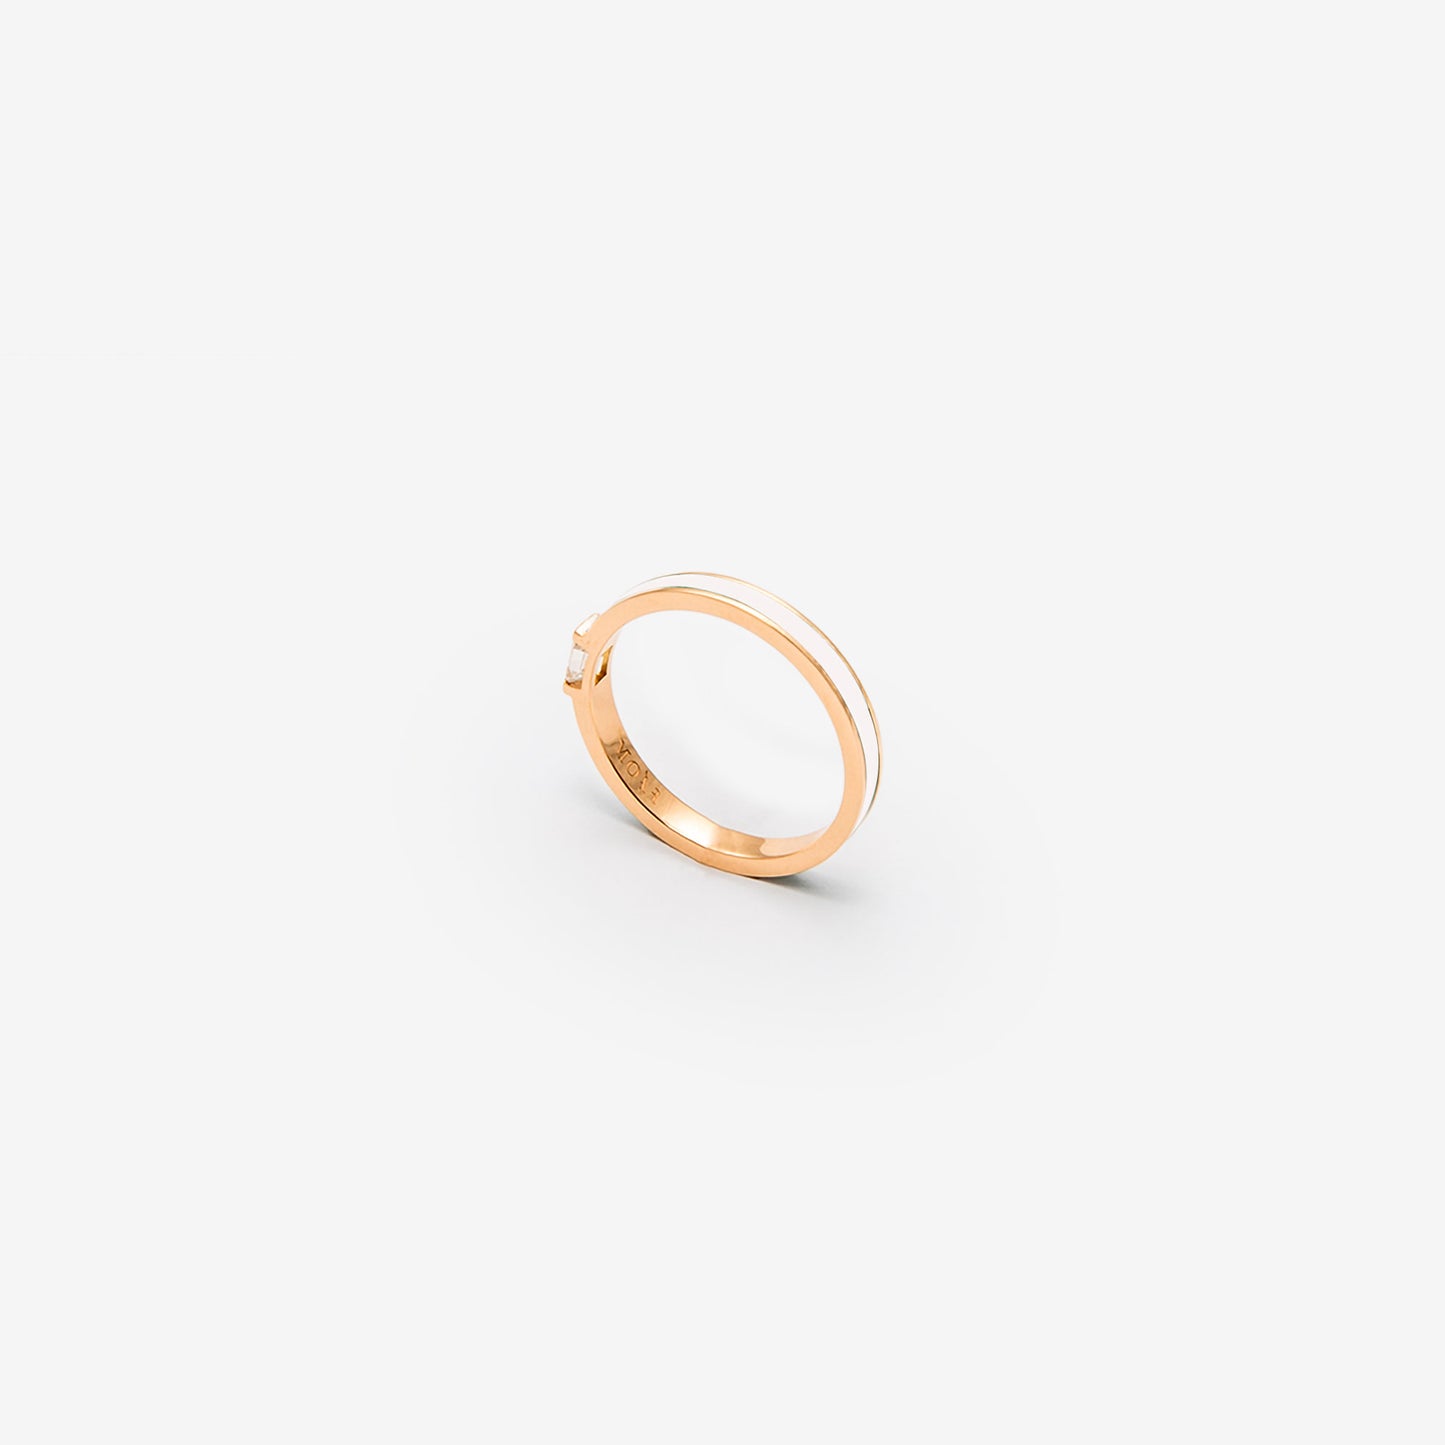 Rose gold band with white enamel and a diamond